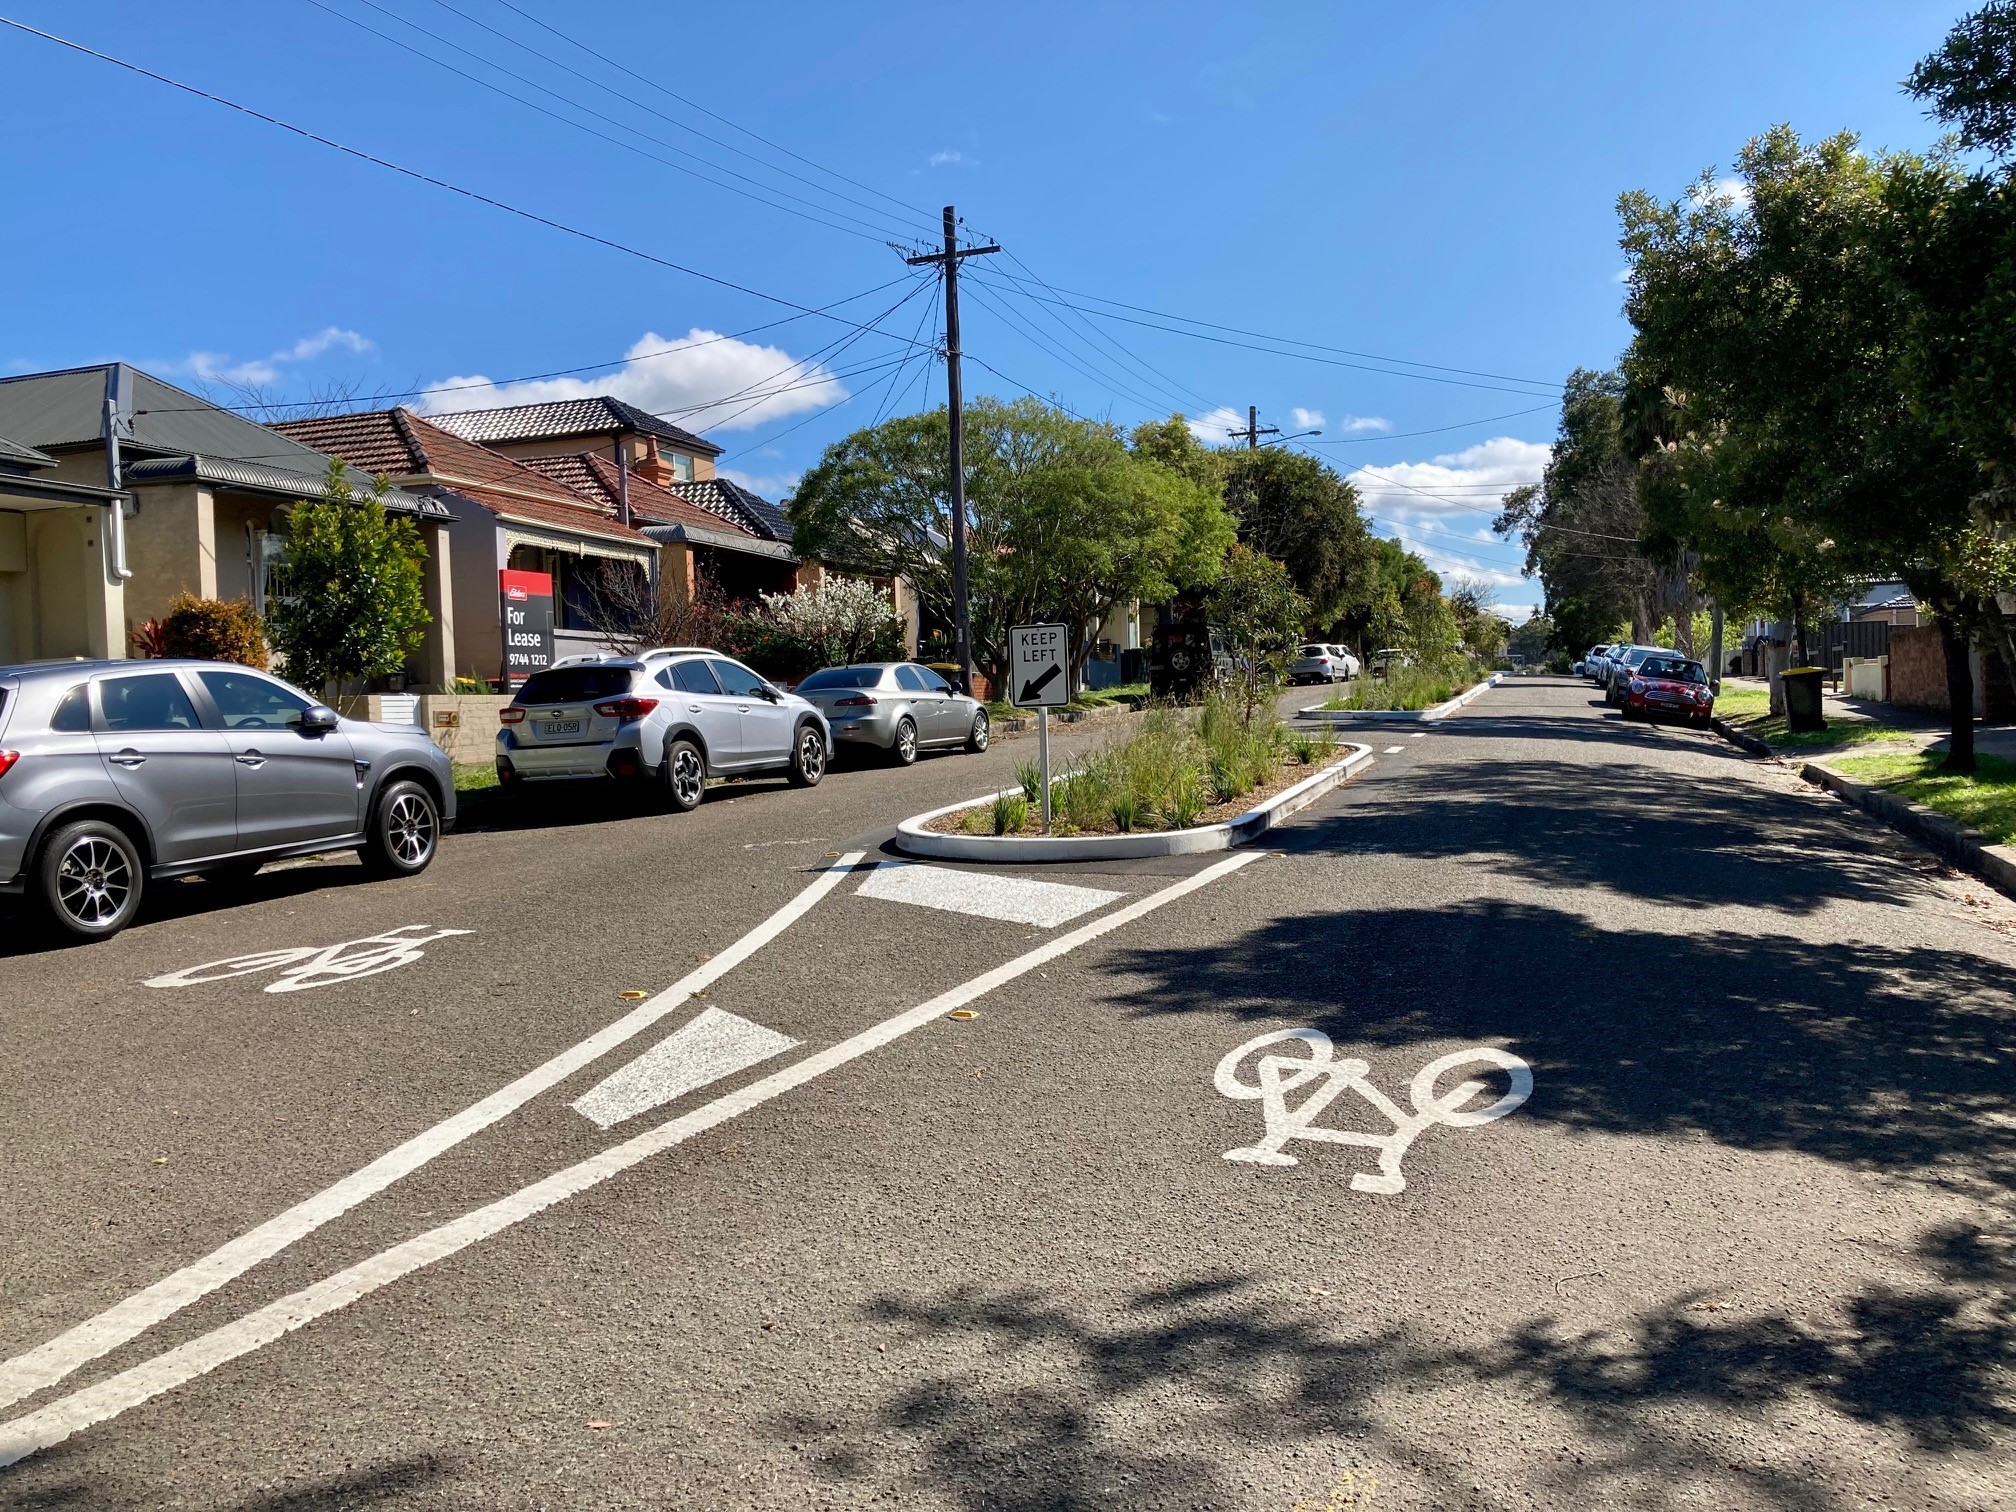 Shared path and planted medians on Weston Street